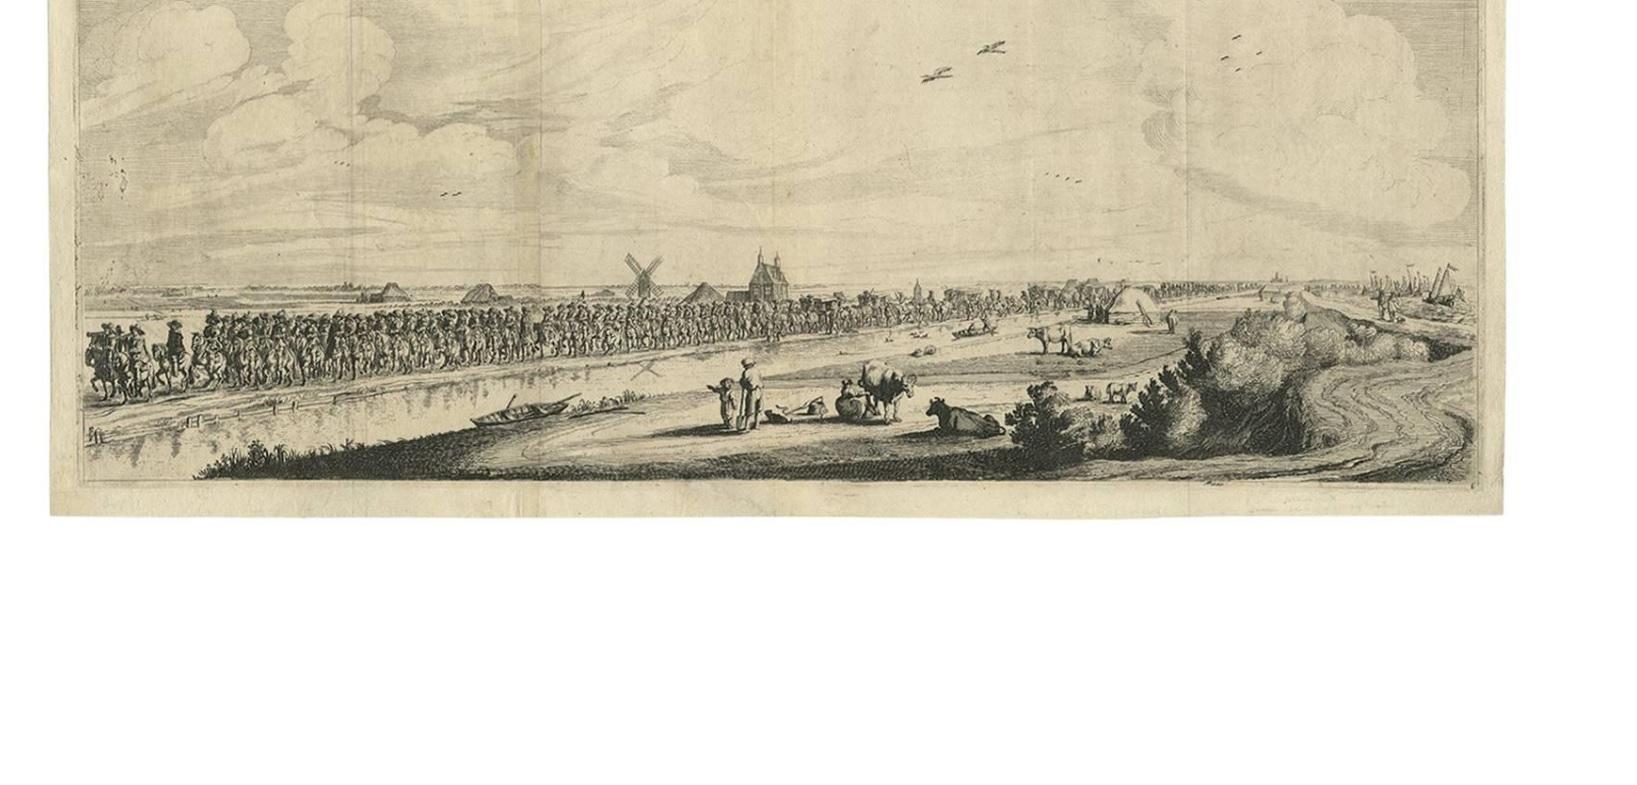 Untitled antique master print of the procession of Maria de Medici along the Haarlemmerweg. The carriages of the queen are accompanied by the Schutterij (militia) of Amsterdam. To the right the IJ is visible, and some farmers with cattle in the